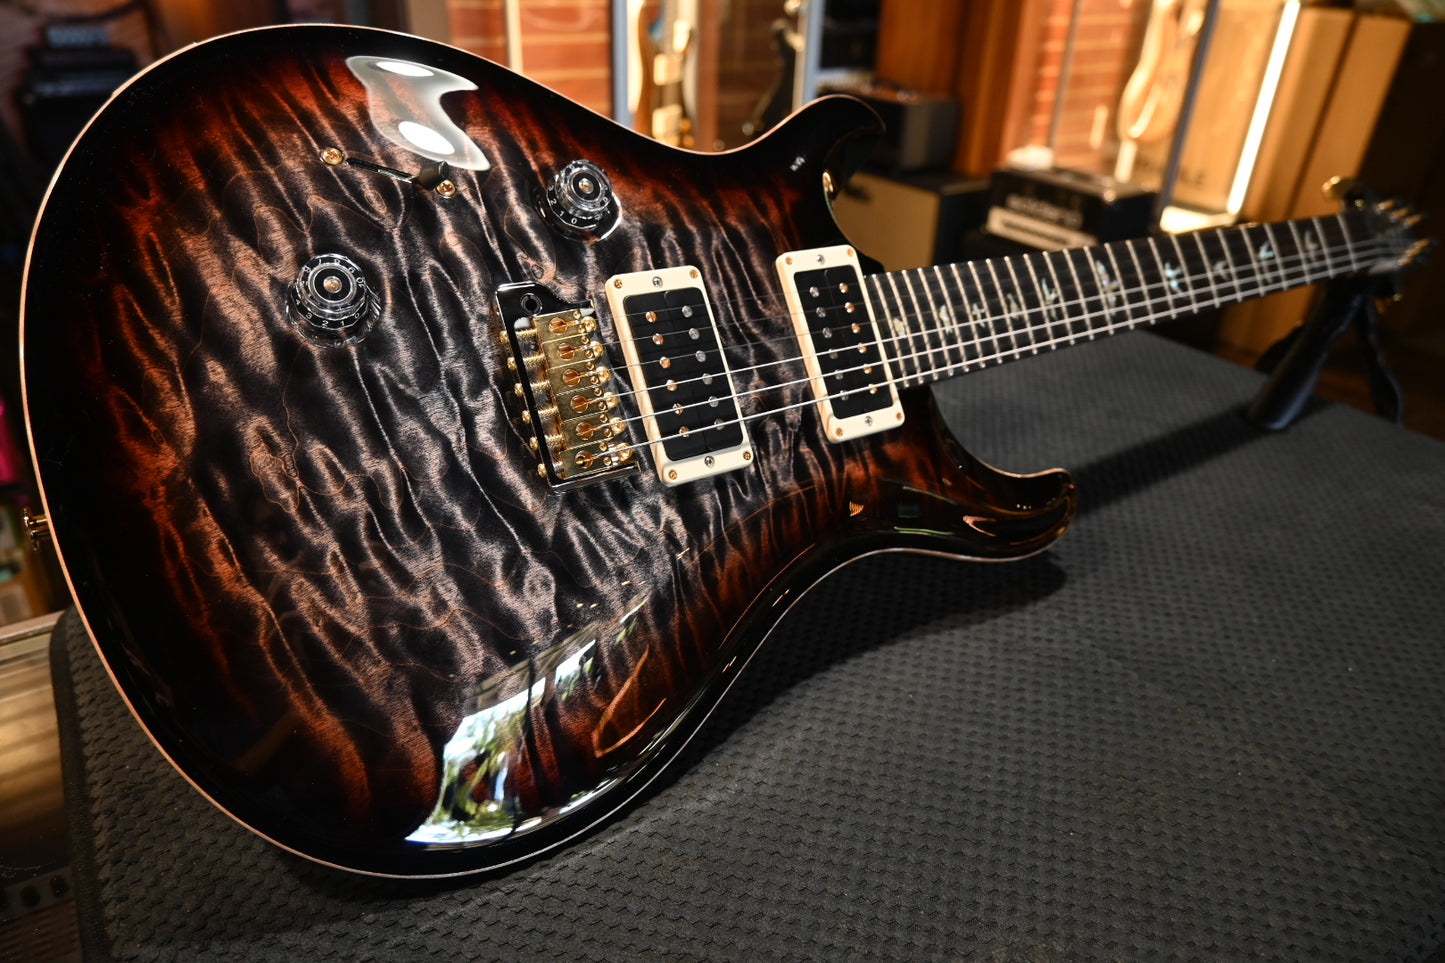 PRS Wood Library Custom 24 Lefty 10-Top Quilt One Piece Top - Charcoal Tri-Color Burst Guitar #0411 - Danville Music